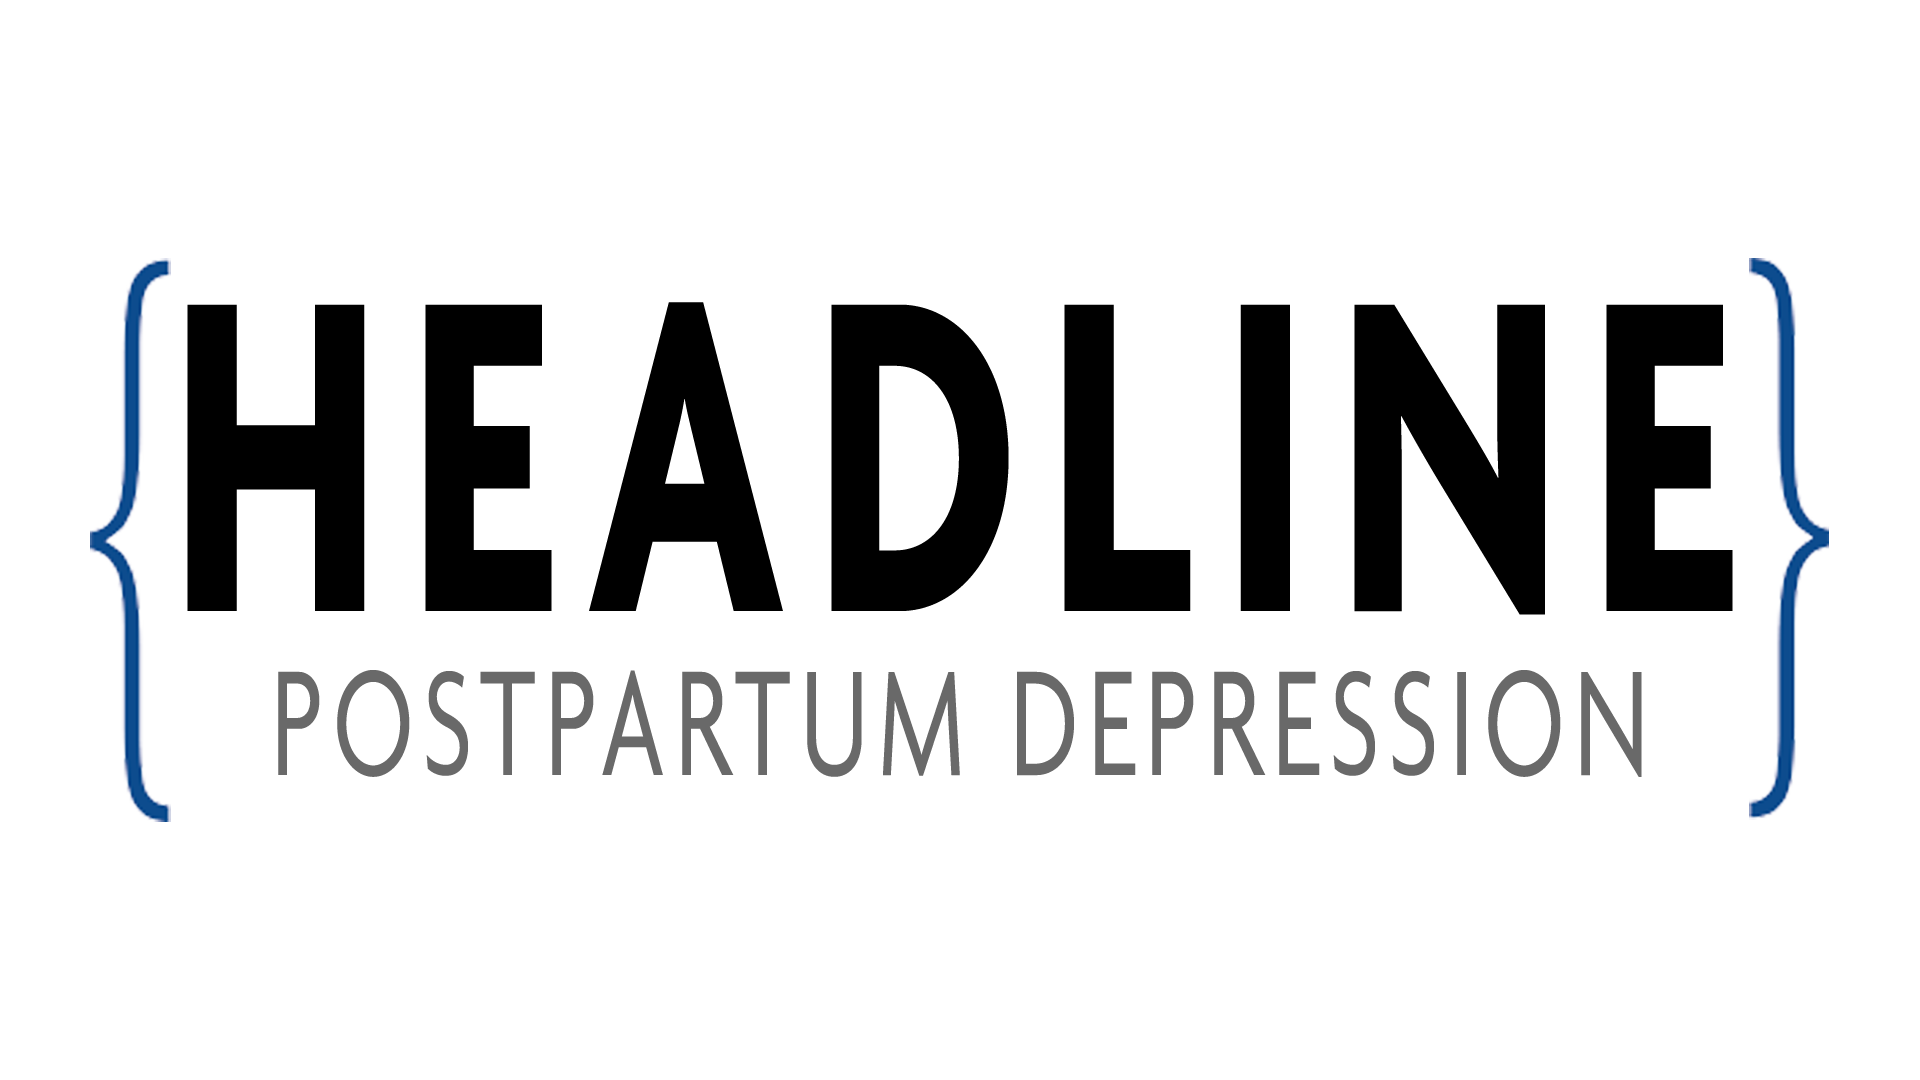 The word HEADLINE in all caps with the words POSTPARTUM DEPRESSION below in all caps